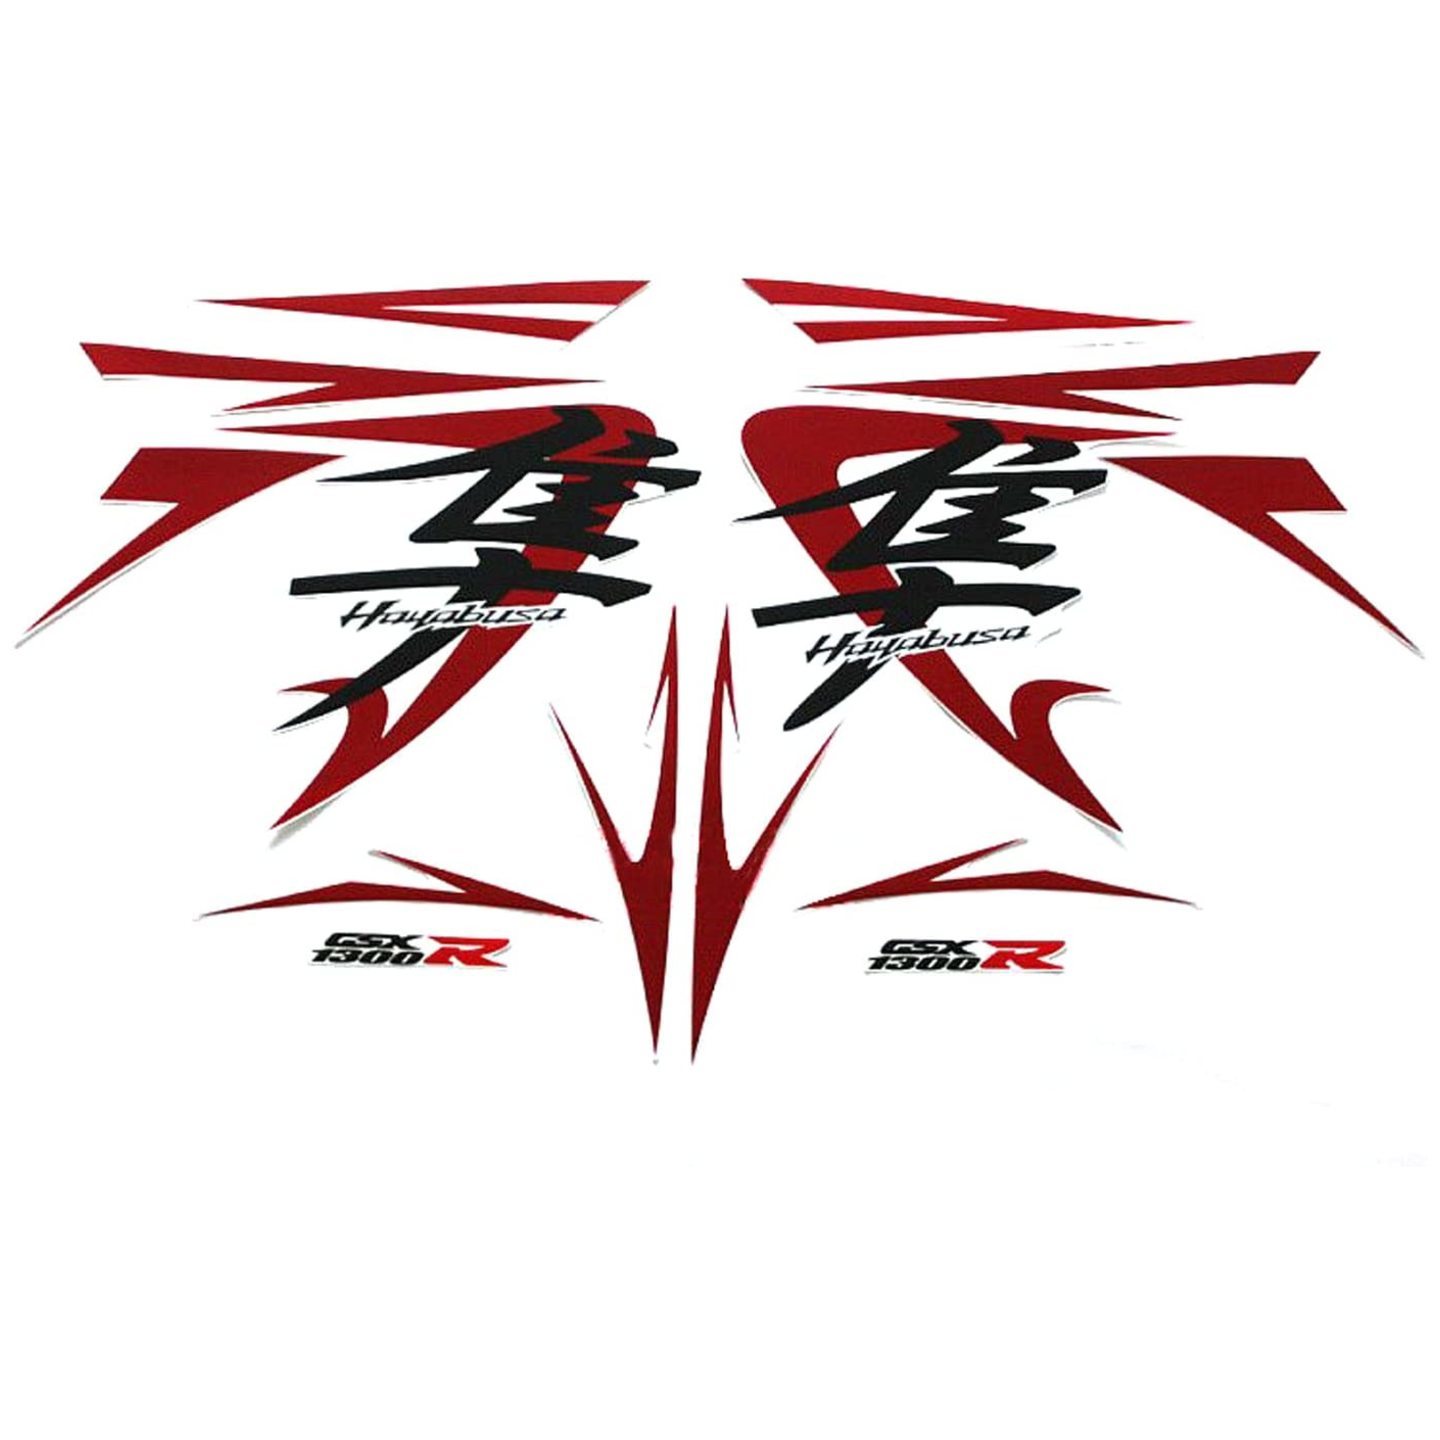 Hayabusa GSXR1300 fairings coverset covers stickers decals